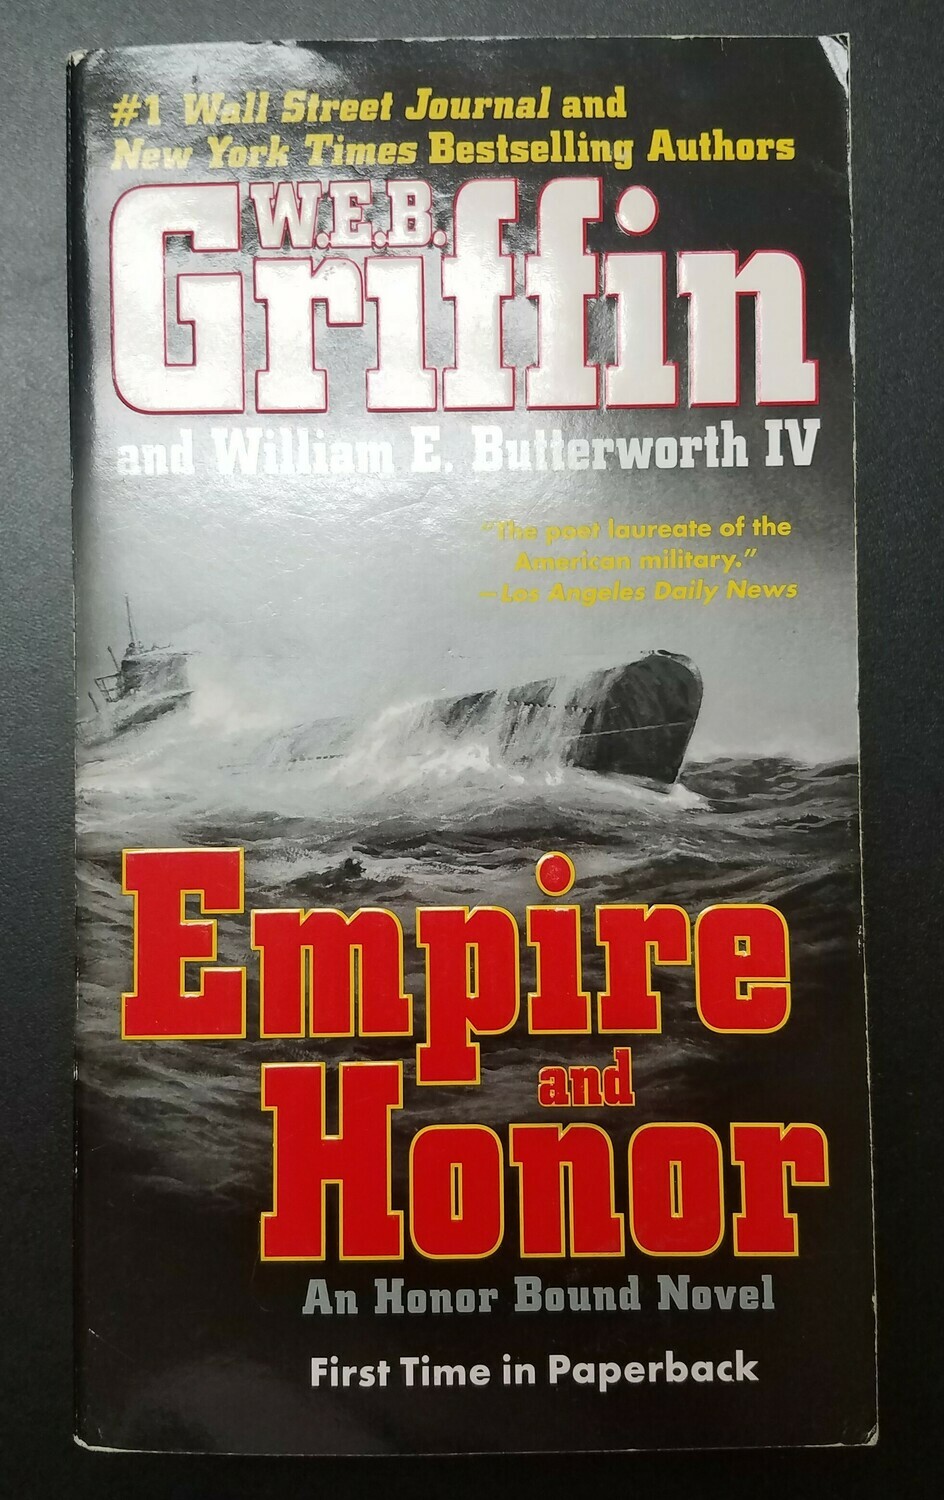 Empire and Honor by W.E.B. Griffin and William E. Butterworth IV